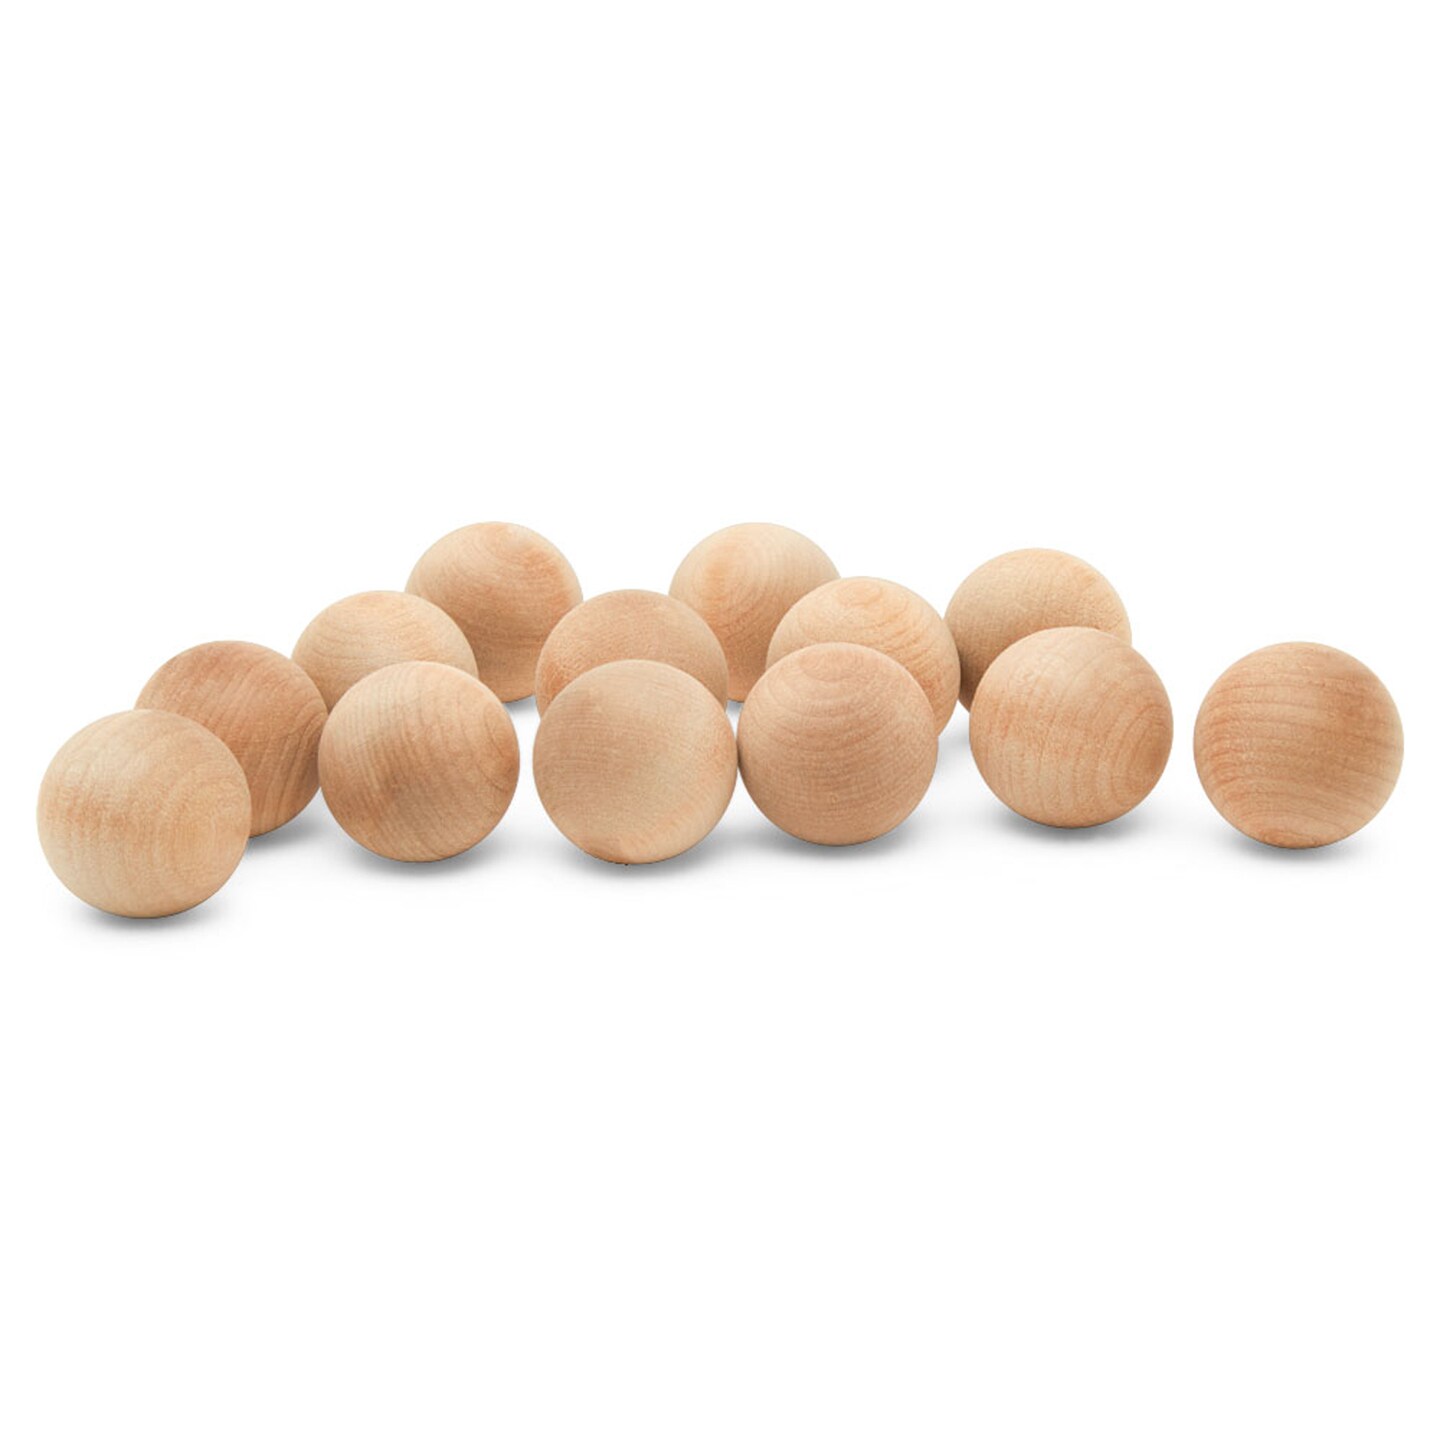 4 inch Round Wooden Balls for Crafts, Bag of 3 Unfinished and Smooth Round  Birch Hardwood Balls, and Wooden Spheres, by Woodpeckers